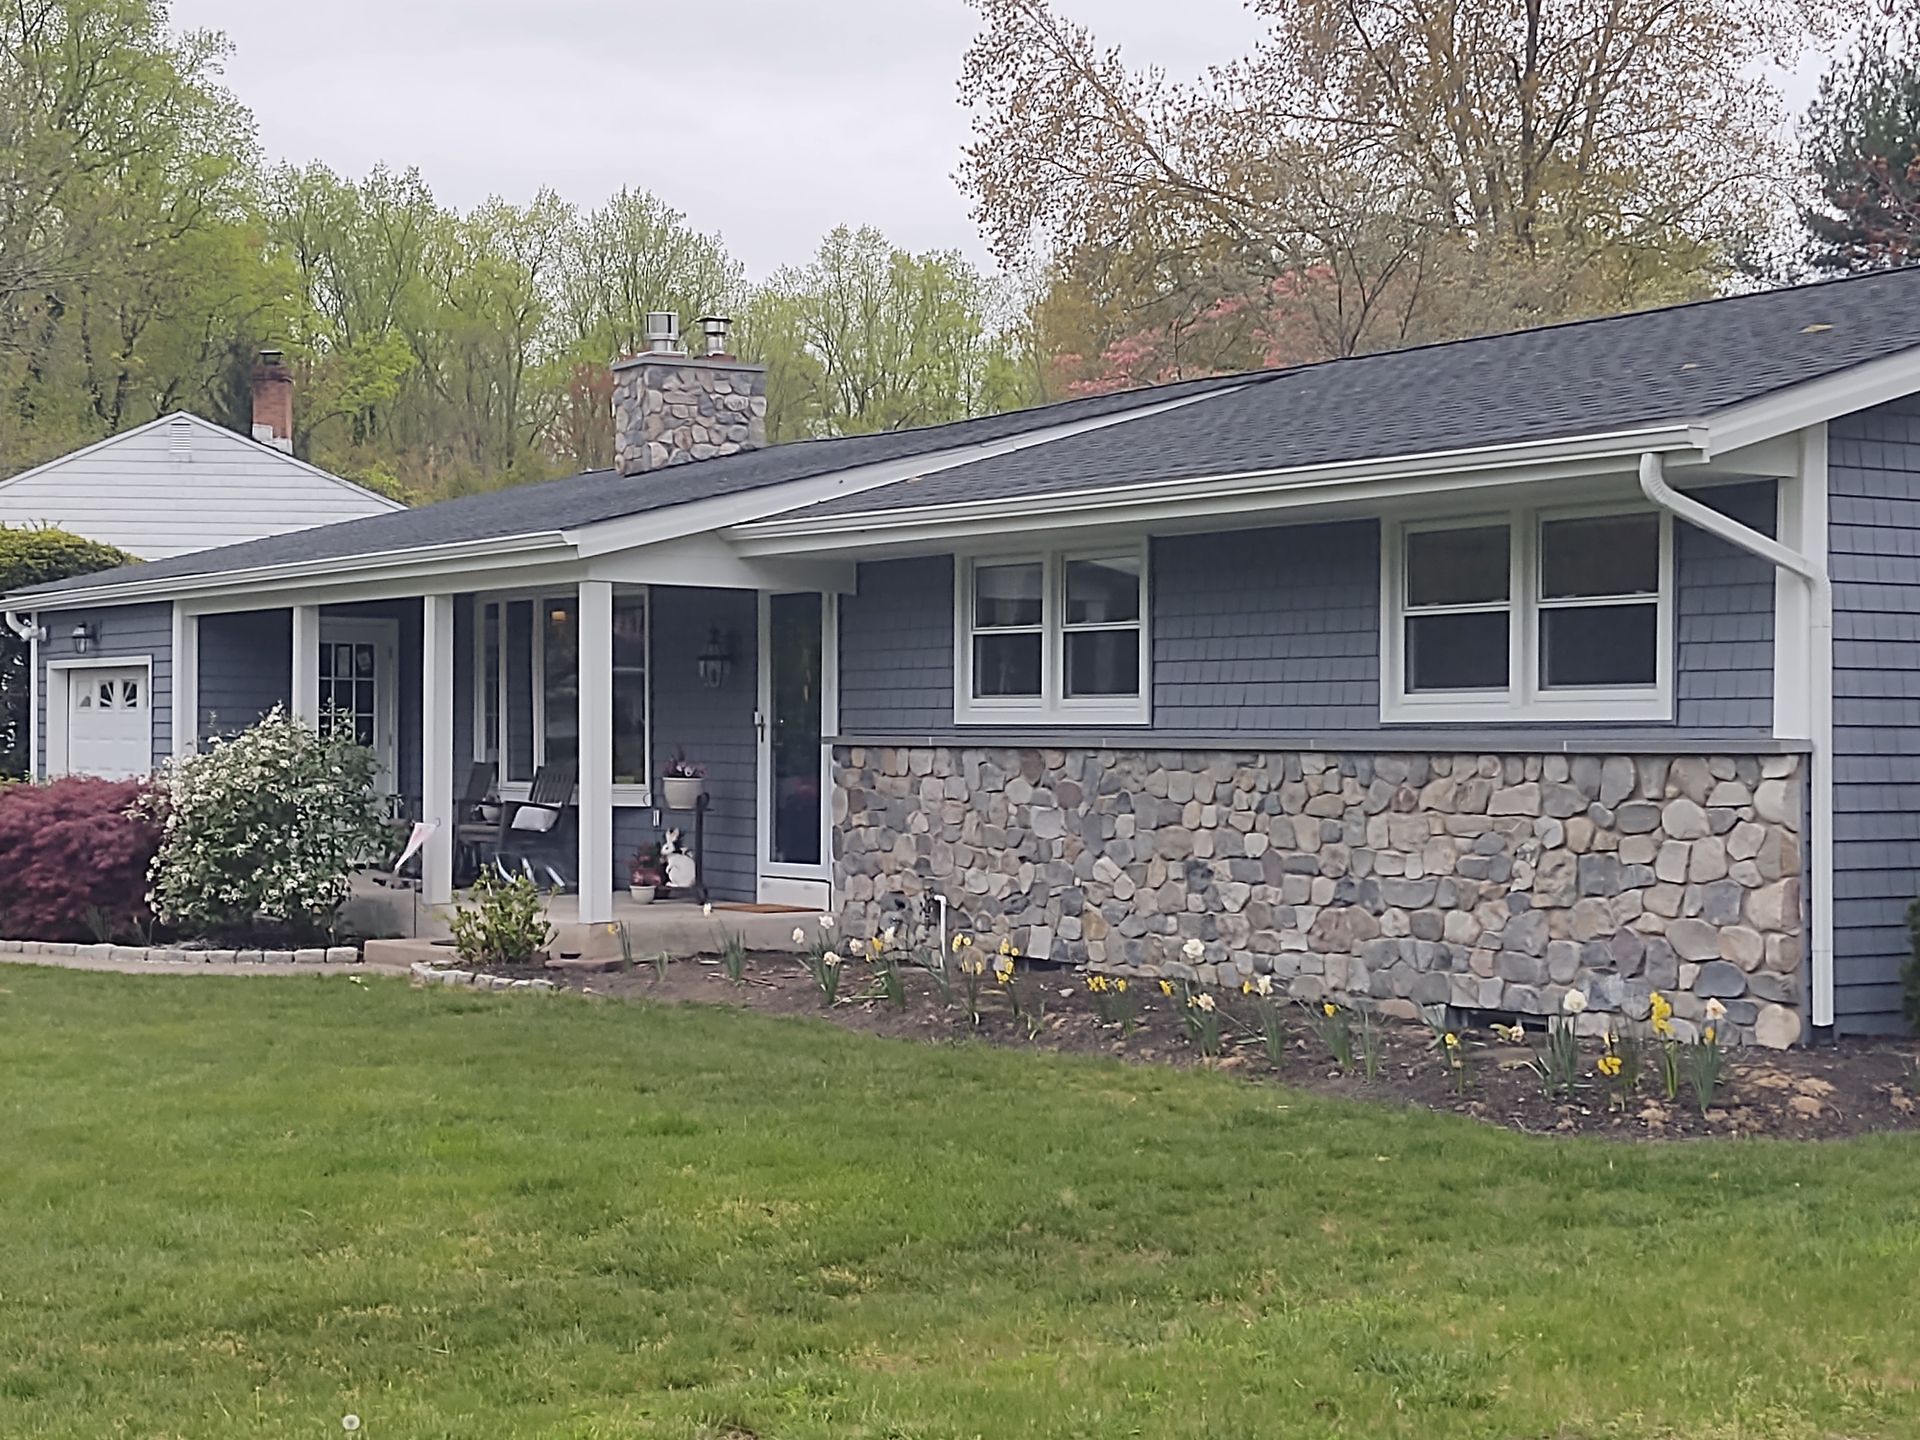 Minimal Stone Fronts - A Luxury House With Stone Fronts in Langhorne, PA